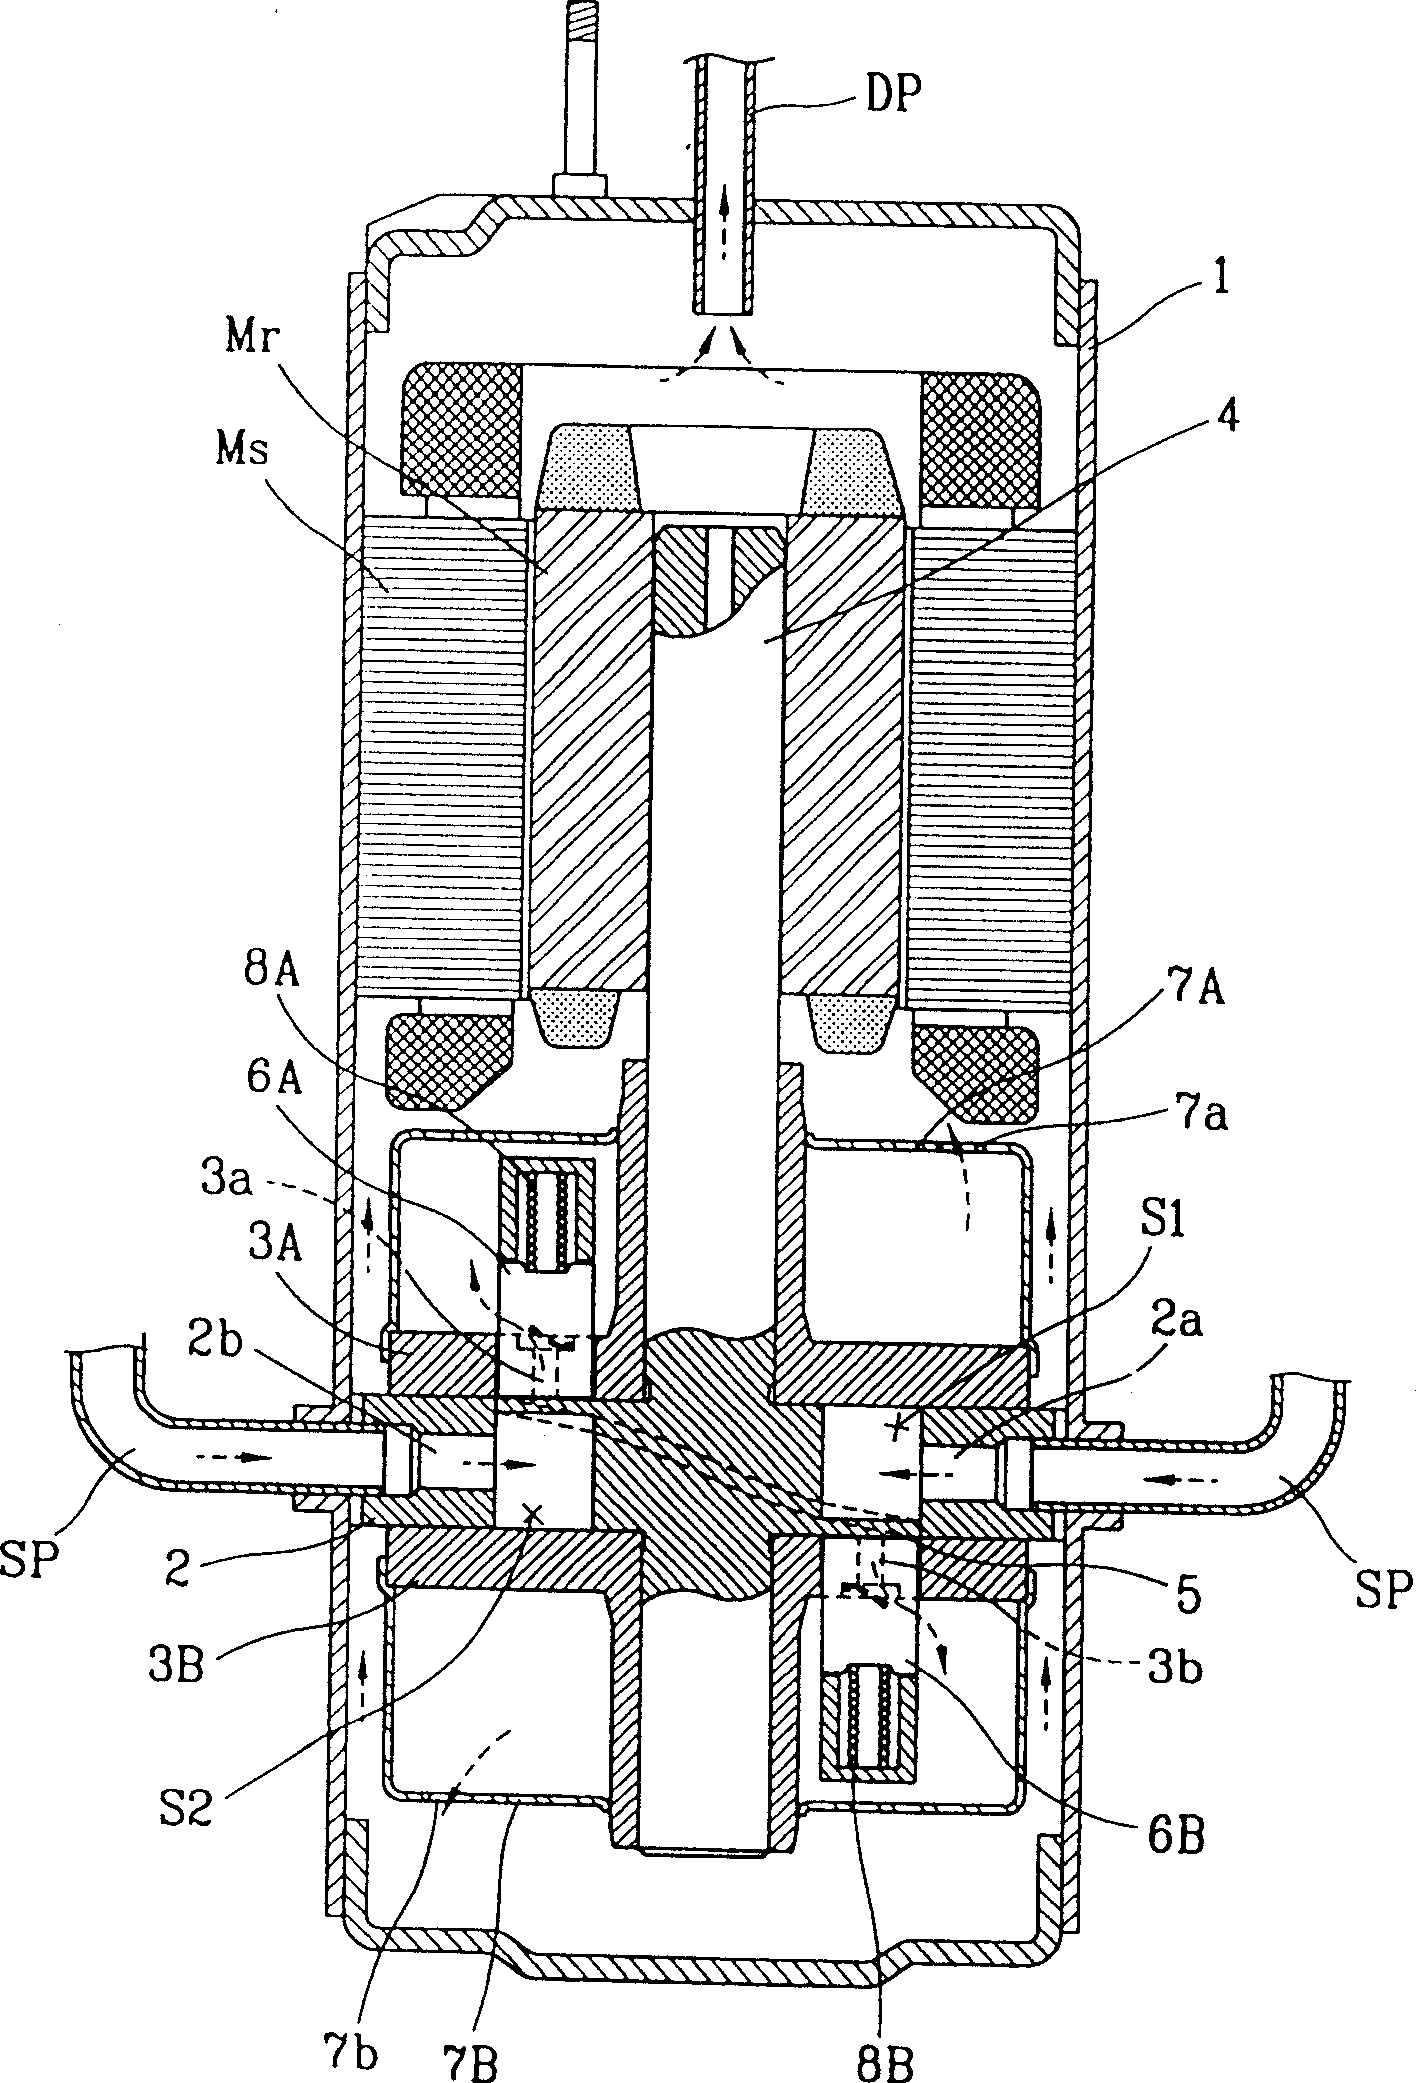 Partition plate structure for closed compressor